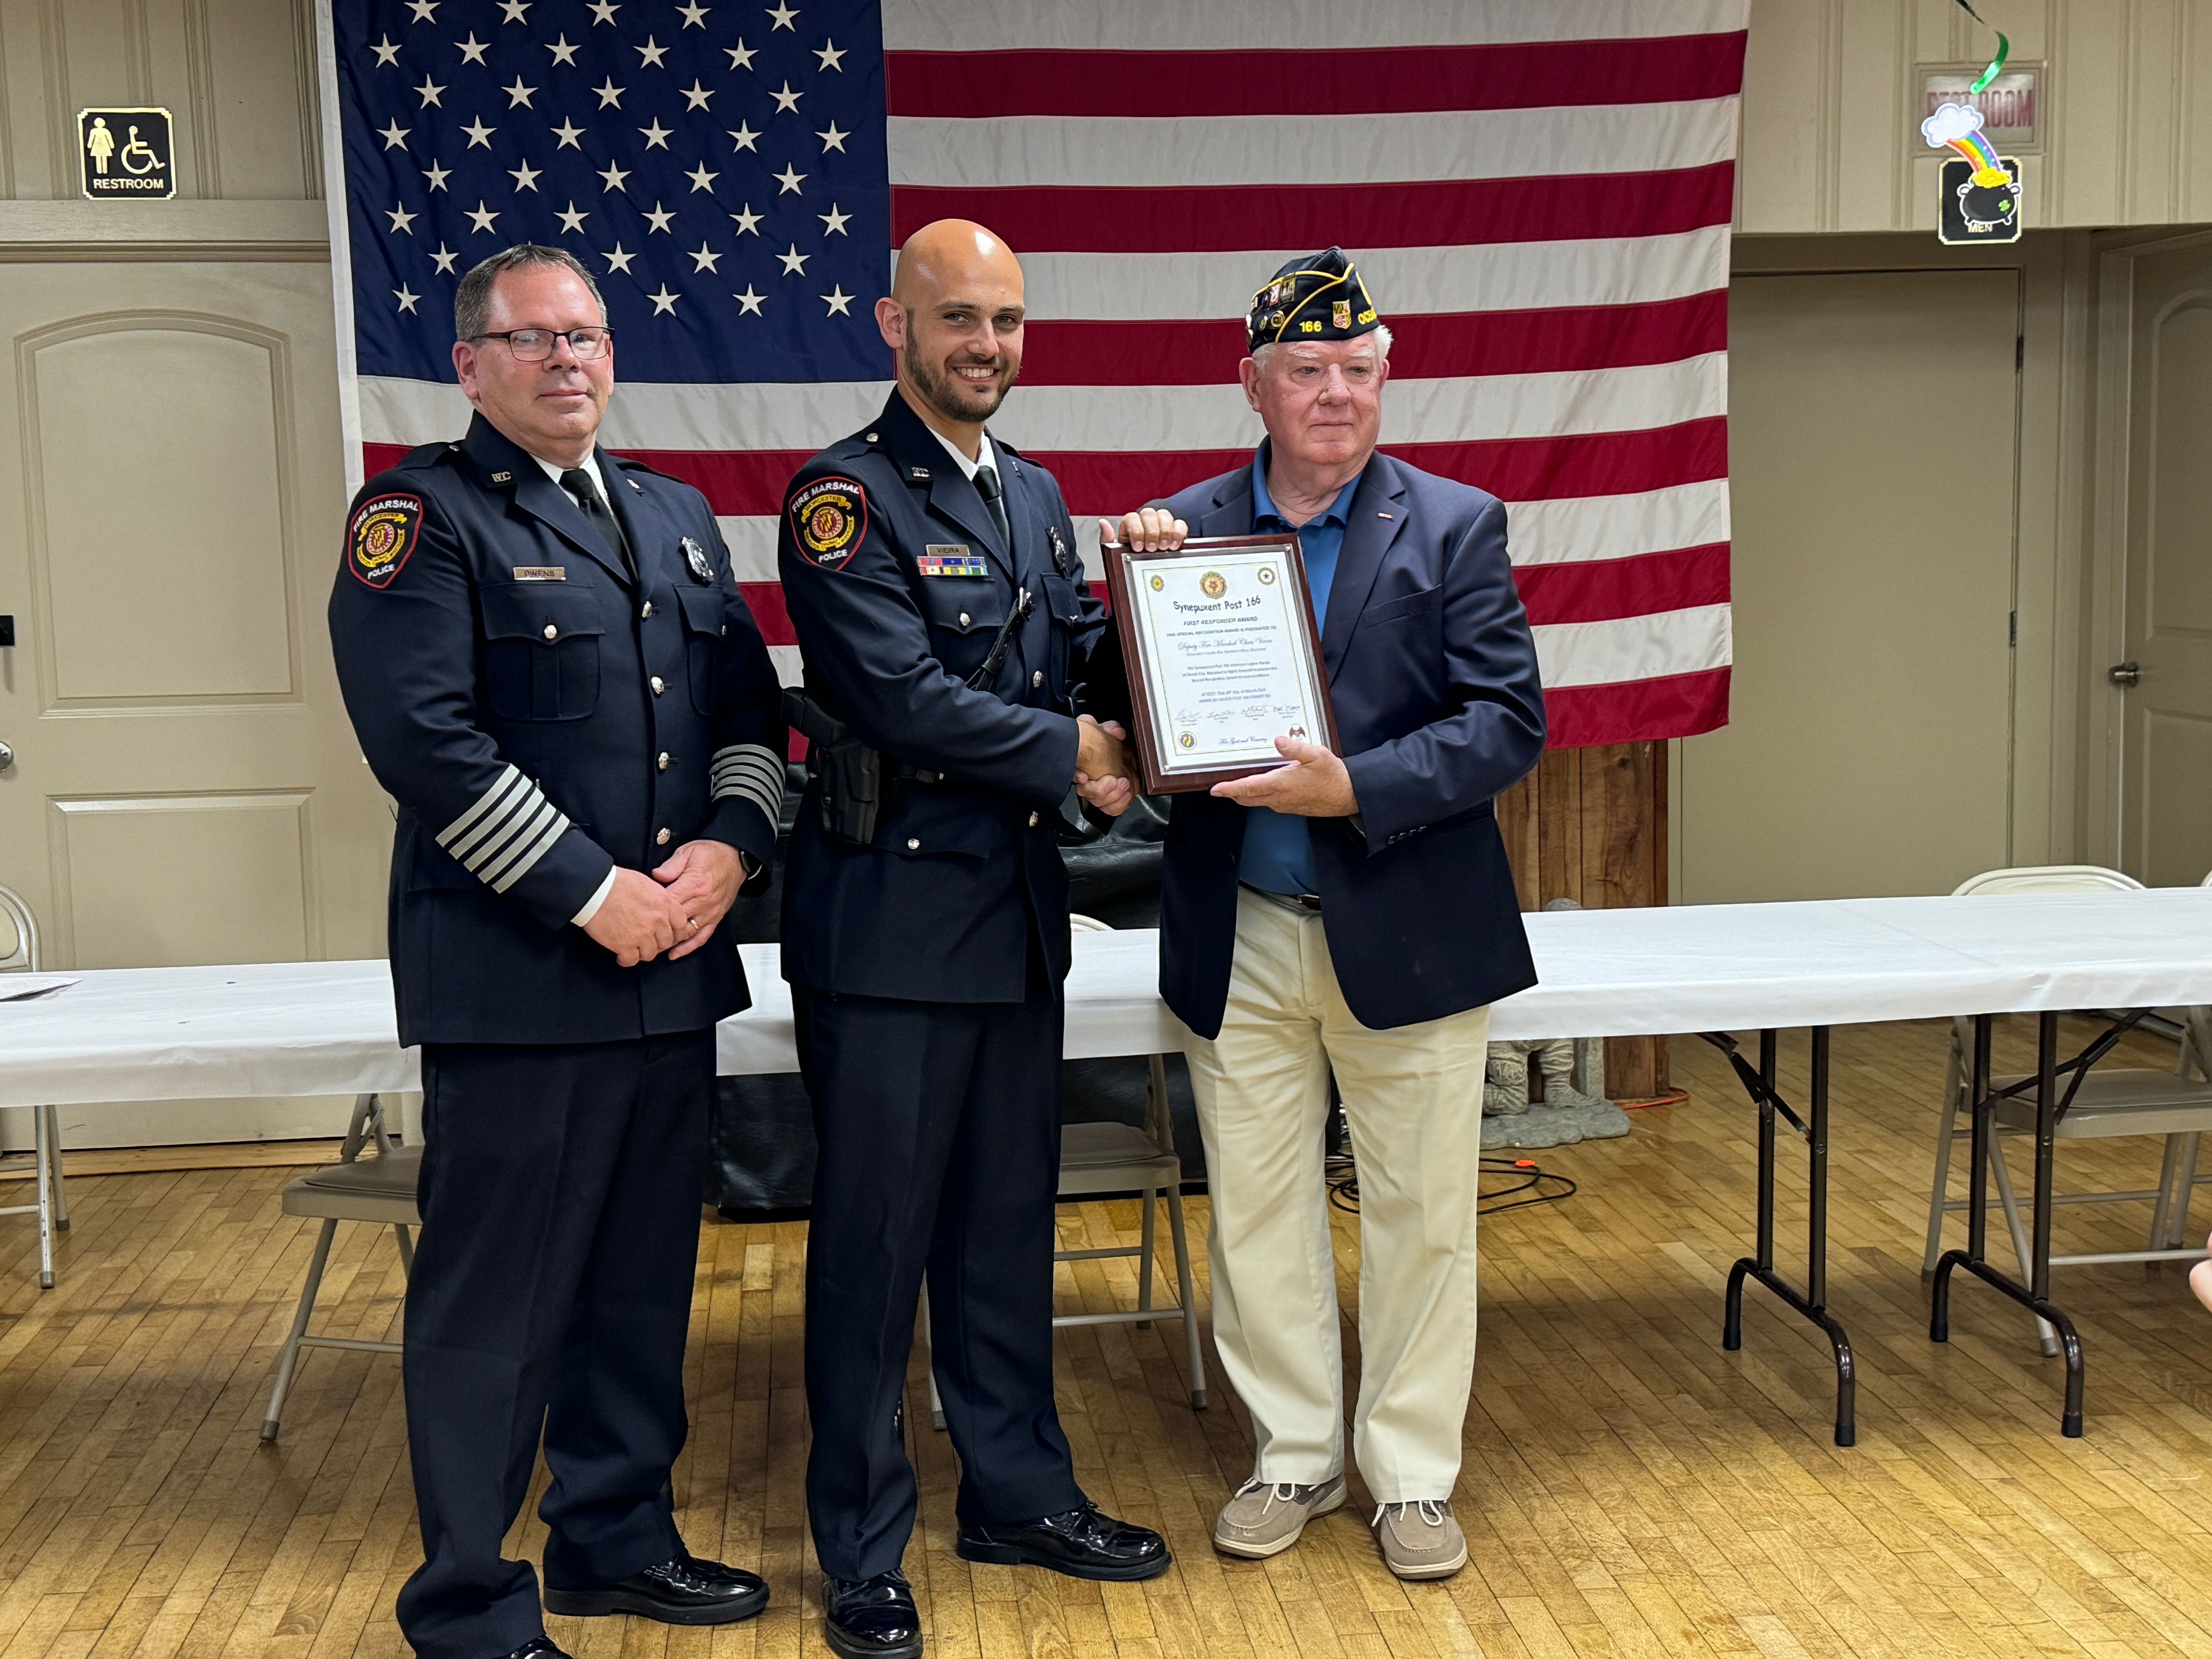 Deputy Christopher Vieira recognized with an award at the American Legion Post 166 in Ocean City Maryland